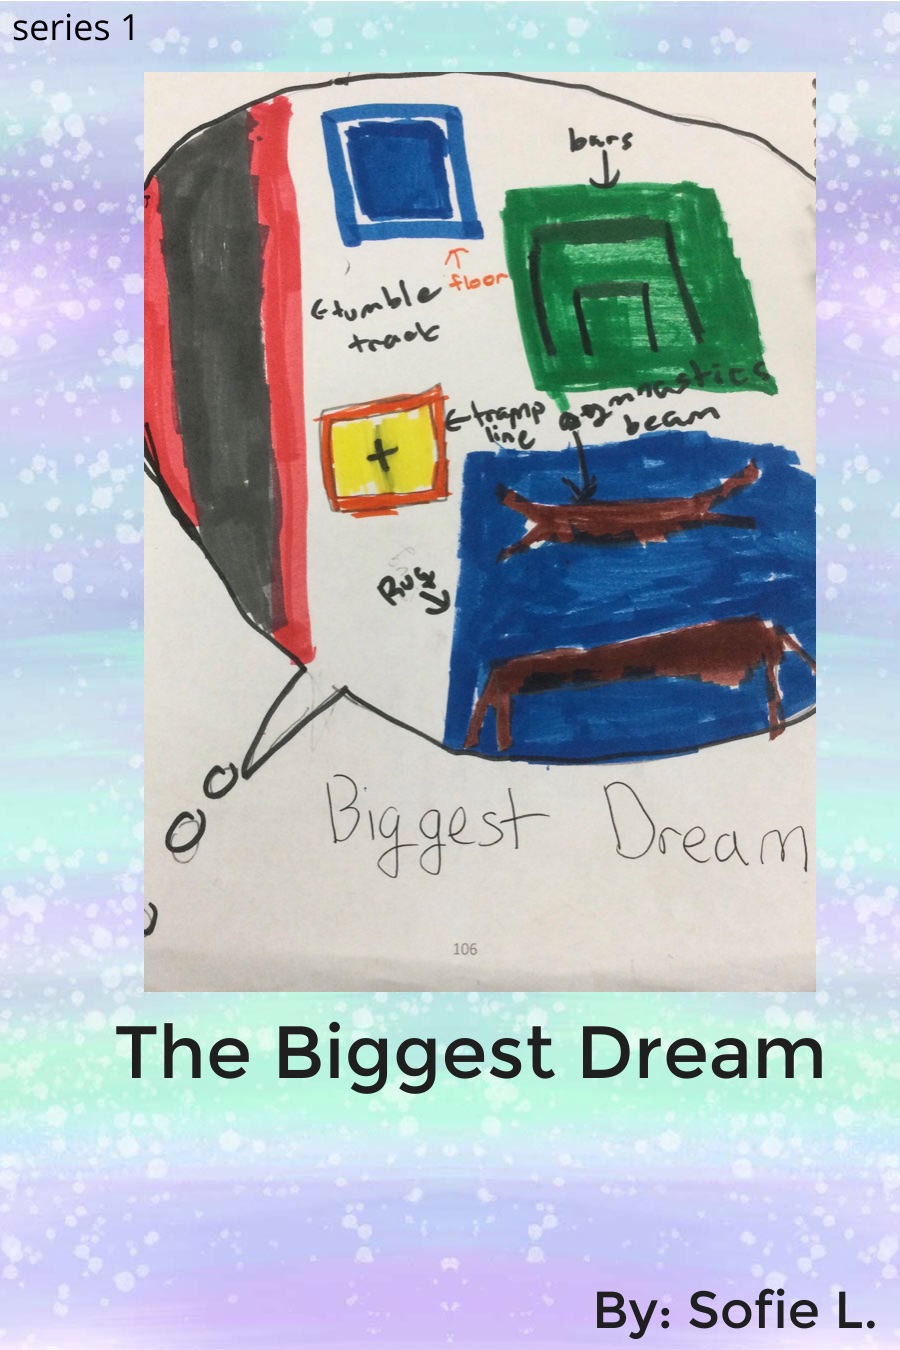 The Biggest Dream by Sofie L Featuring Stacey K